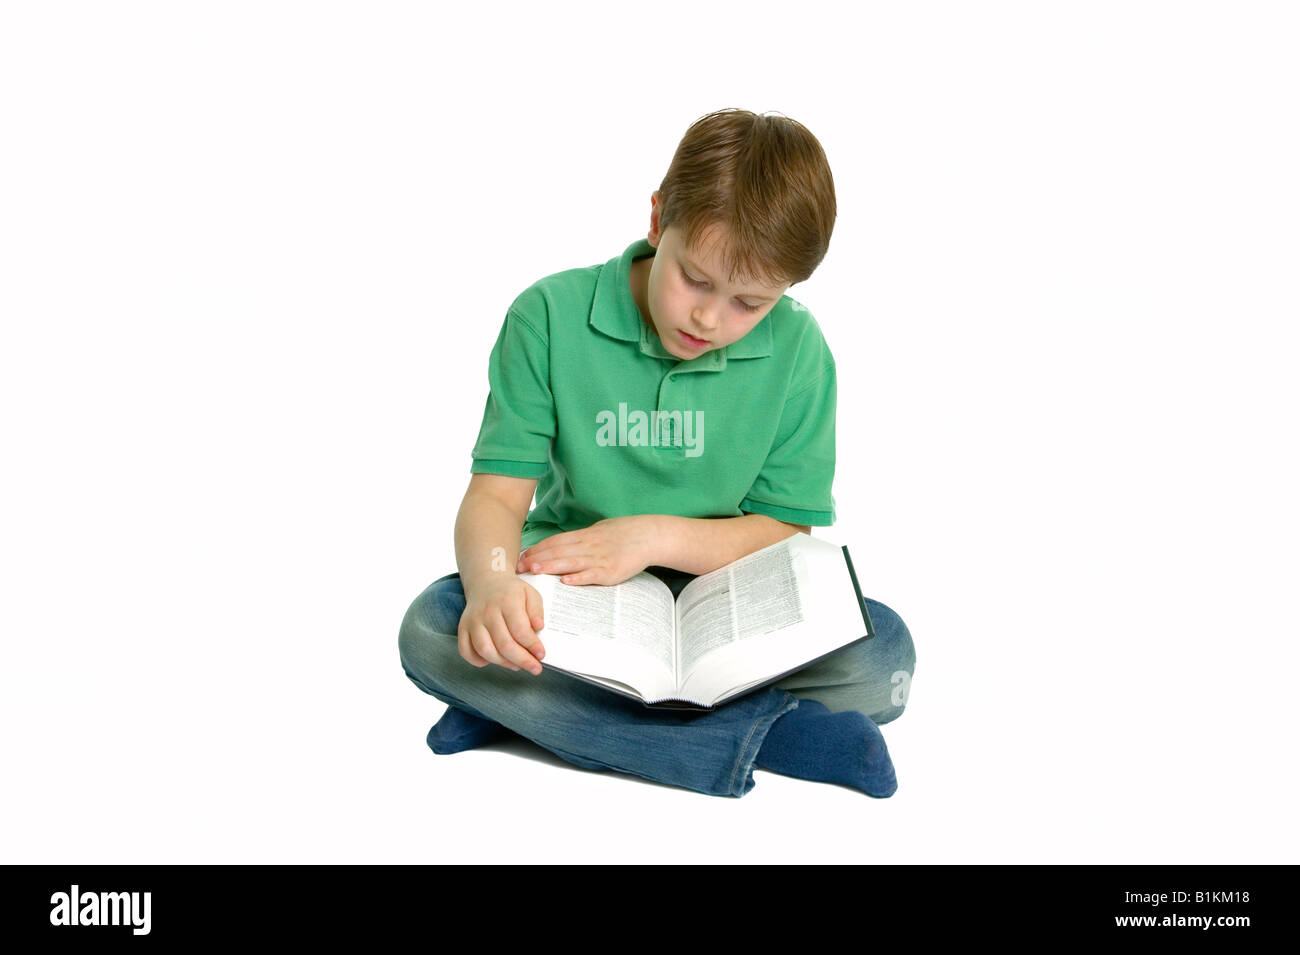 Boy of primary school age sat crossed legs reading a reference book isolated on a white background Stock Photo